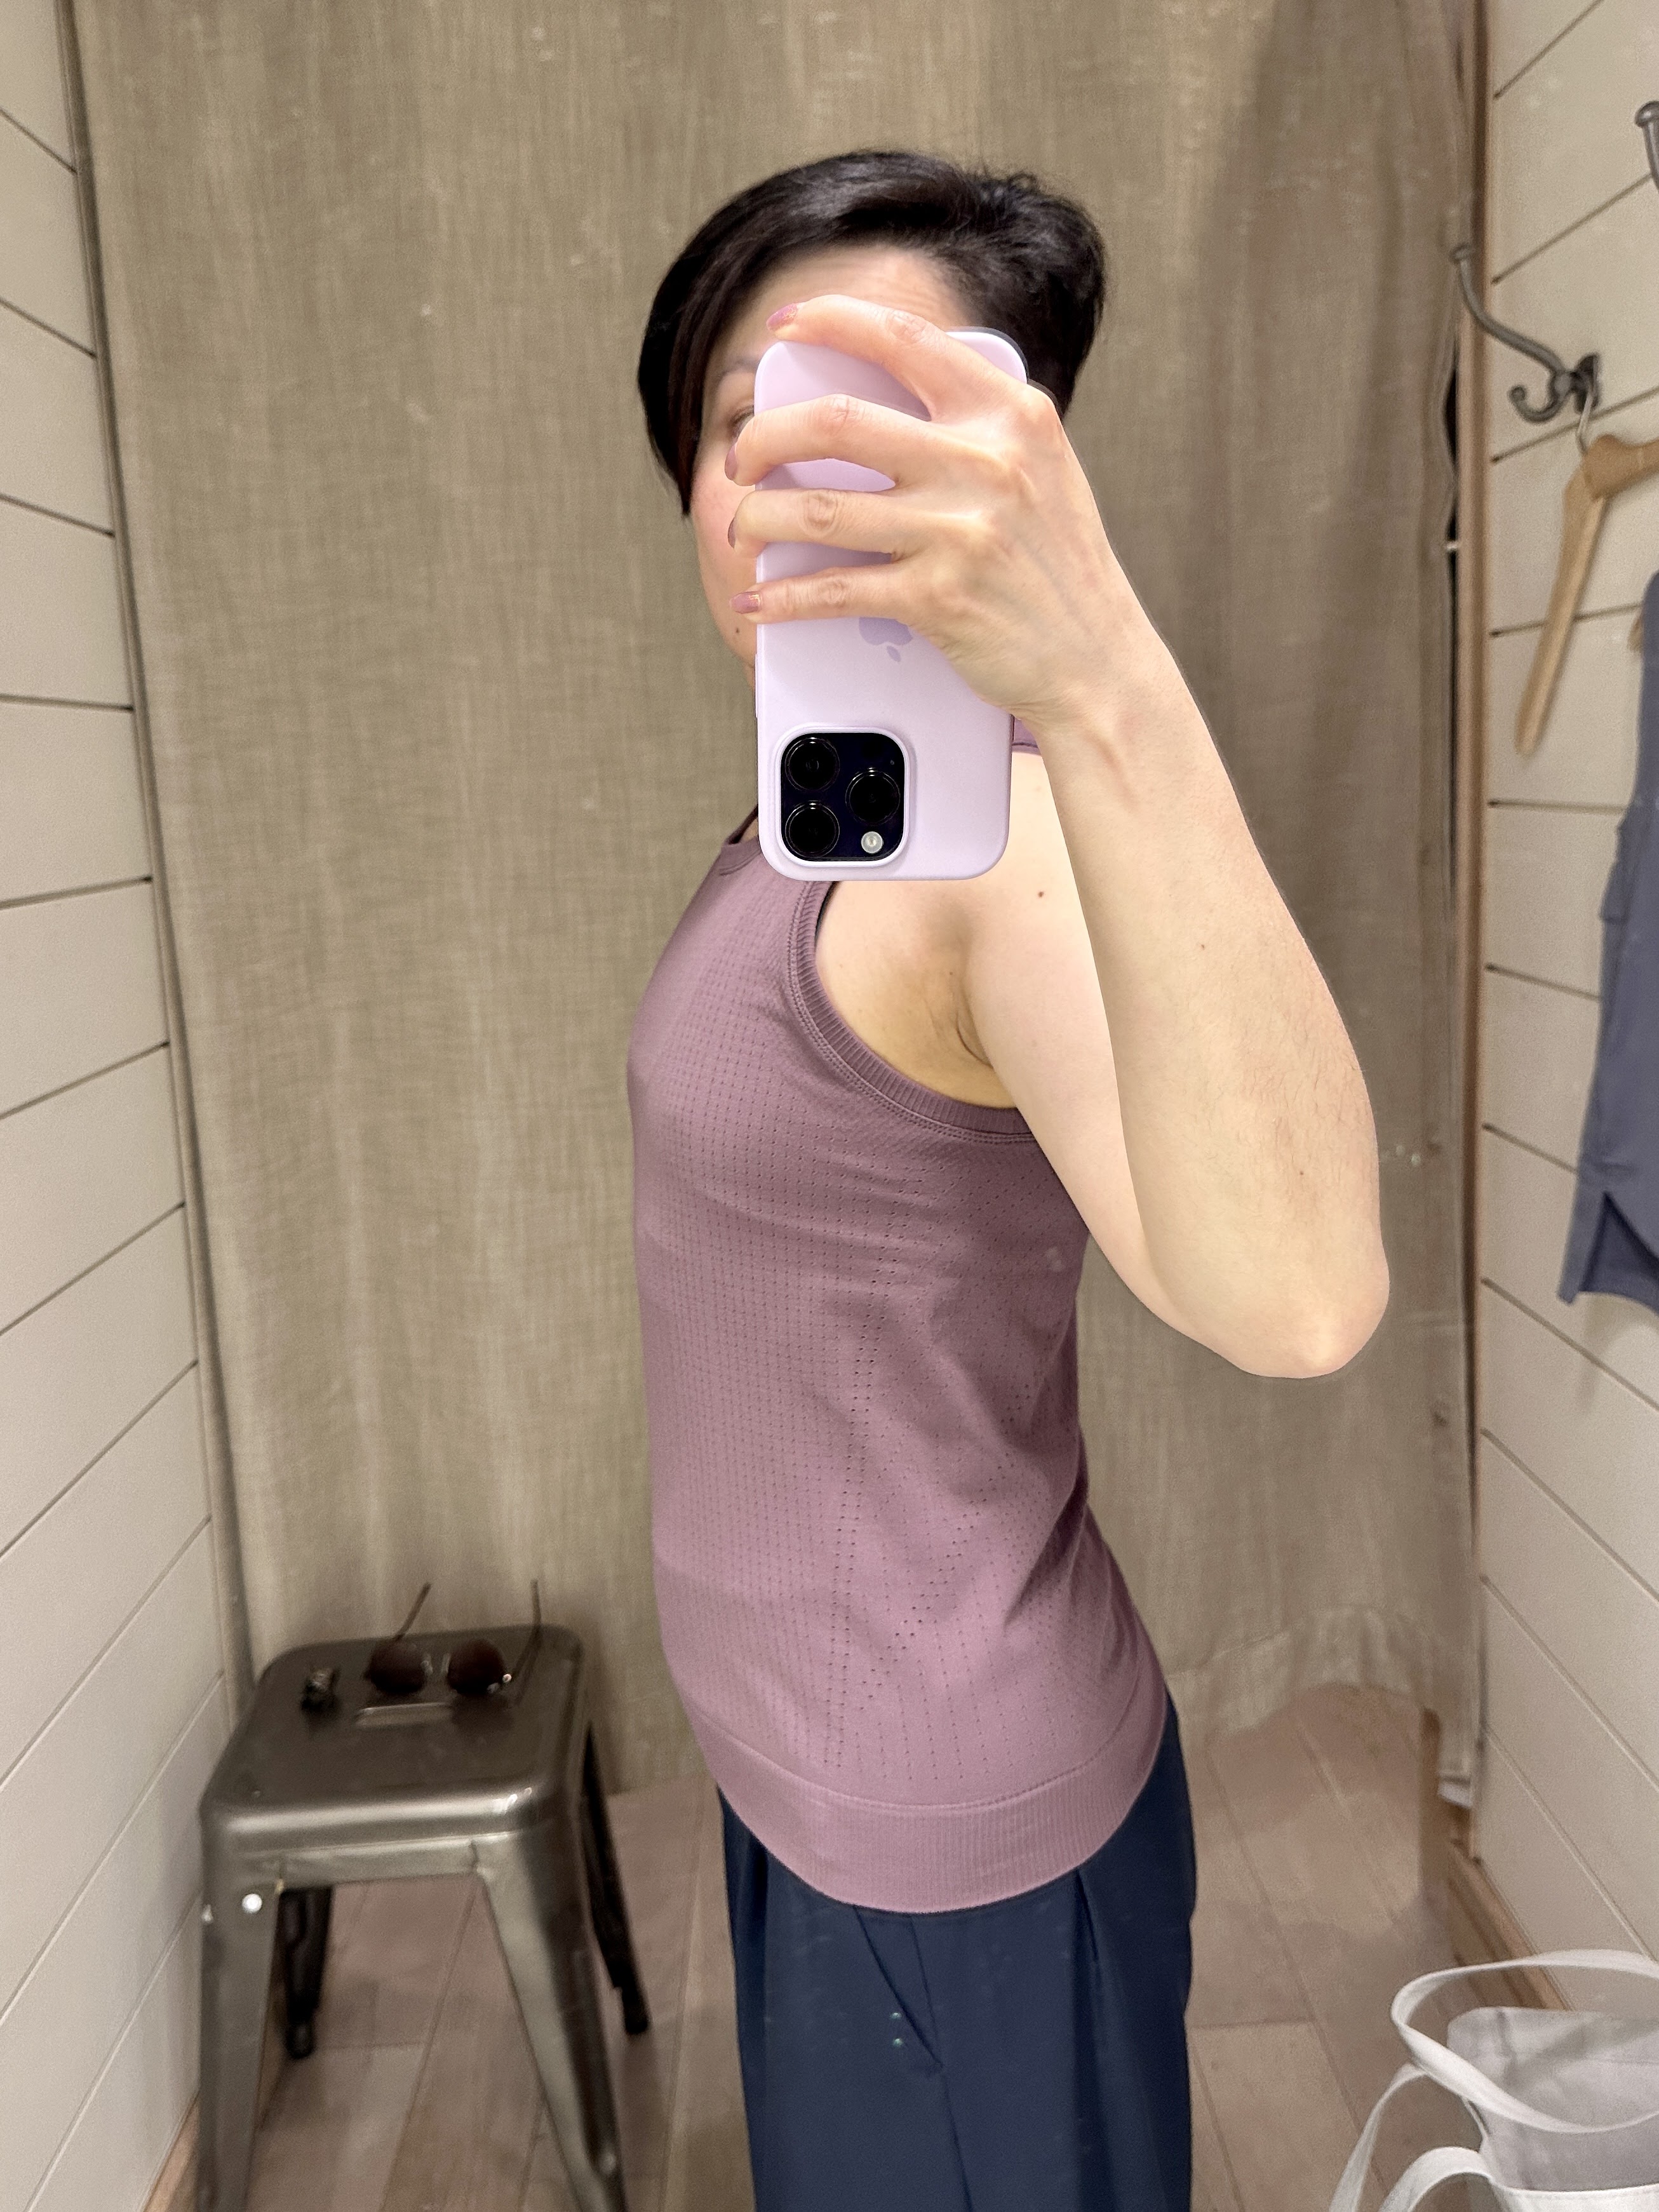 Renew Seamless Long Sleeve Top - Frosted Lilac